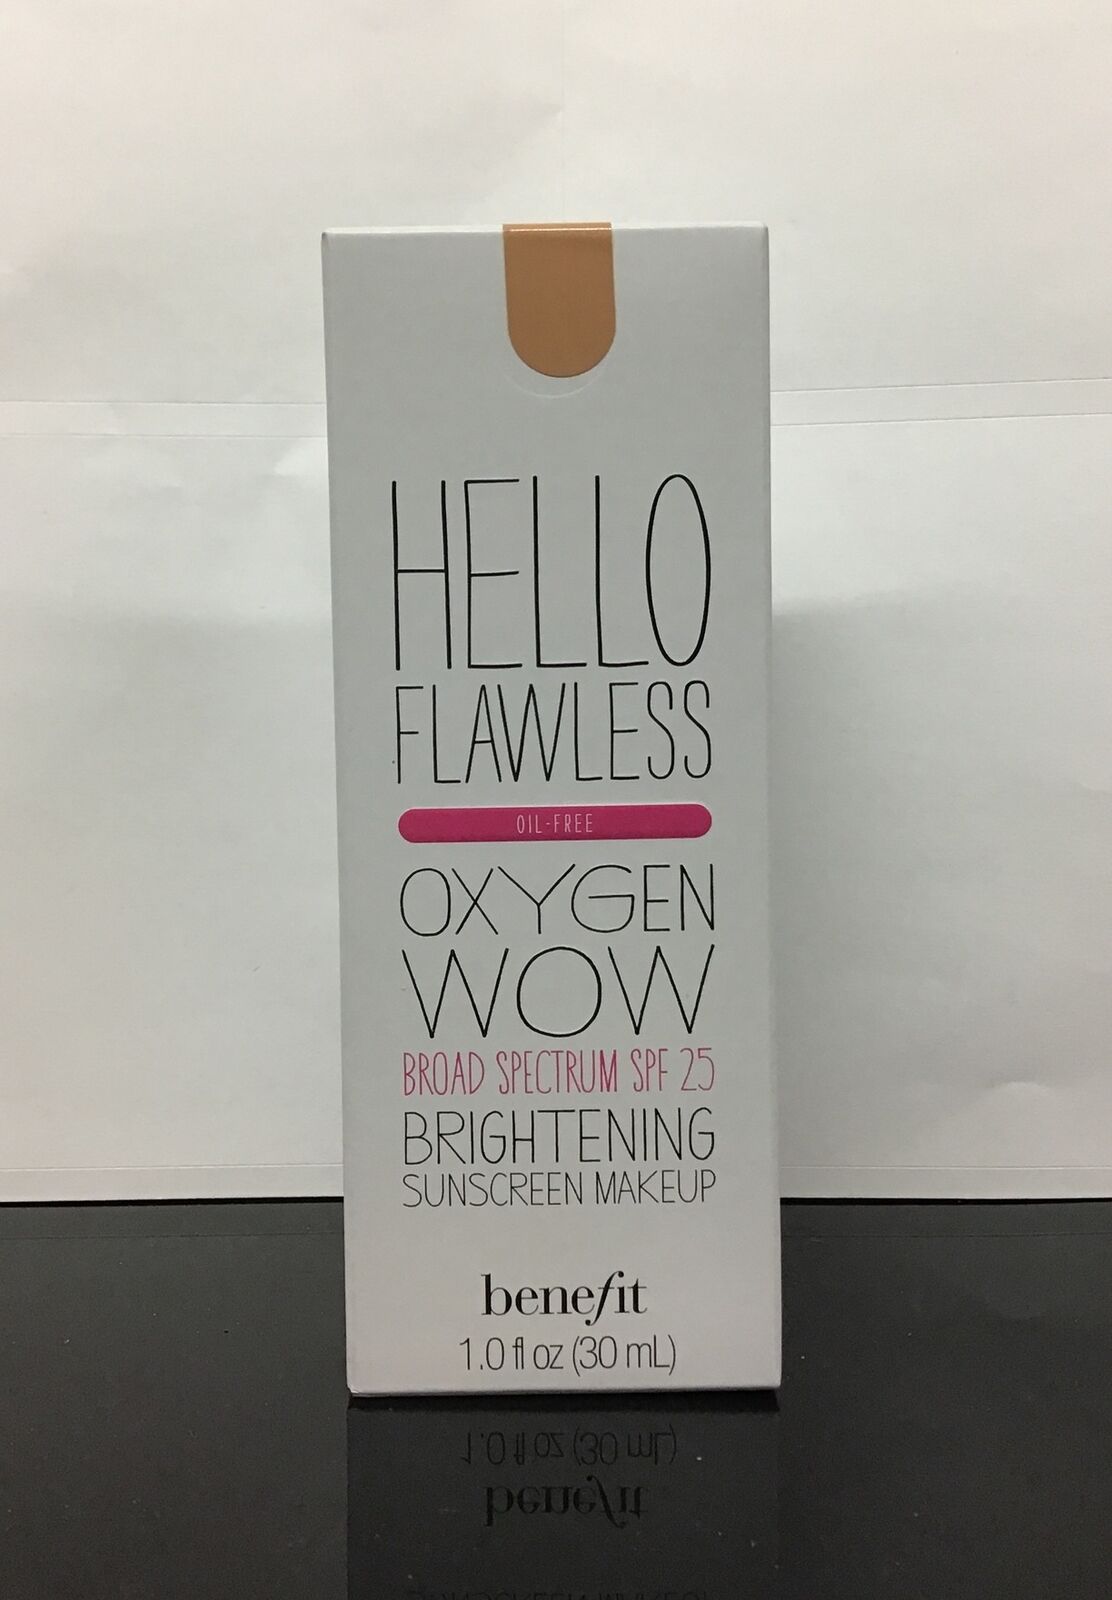 Benefit Hello Flawless Oxygen Wow Sunscreen Makeup -BEIGE- 1 Oz, As Pictured.